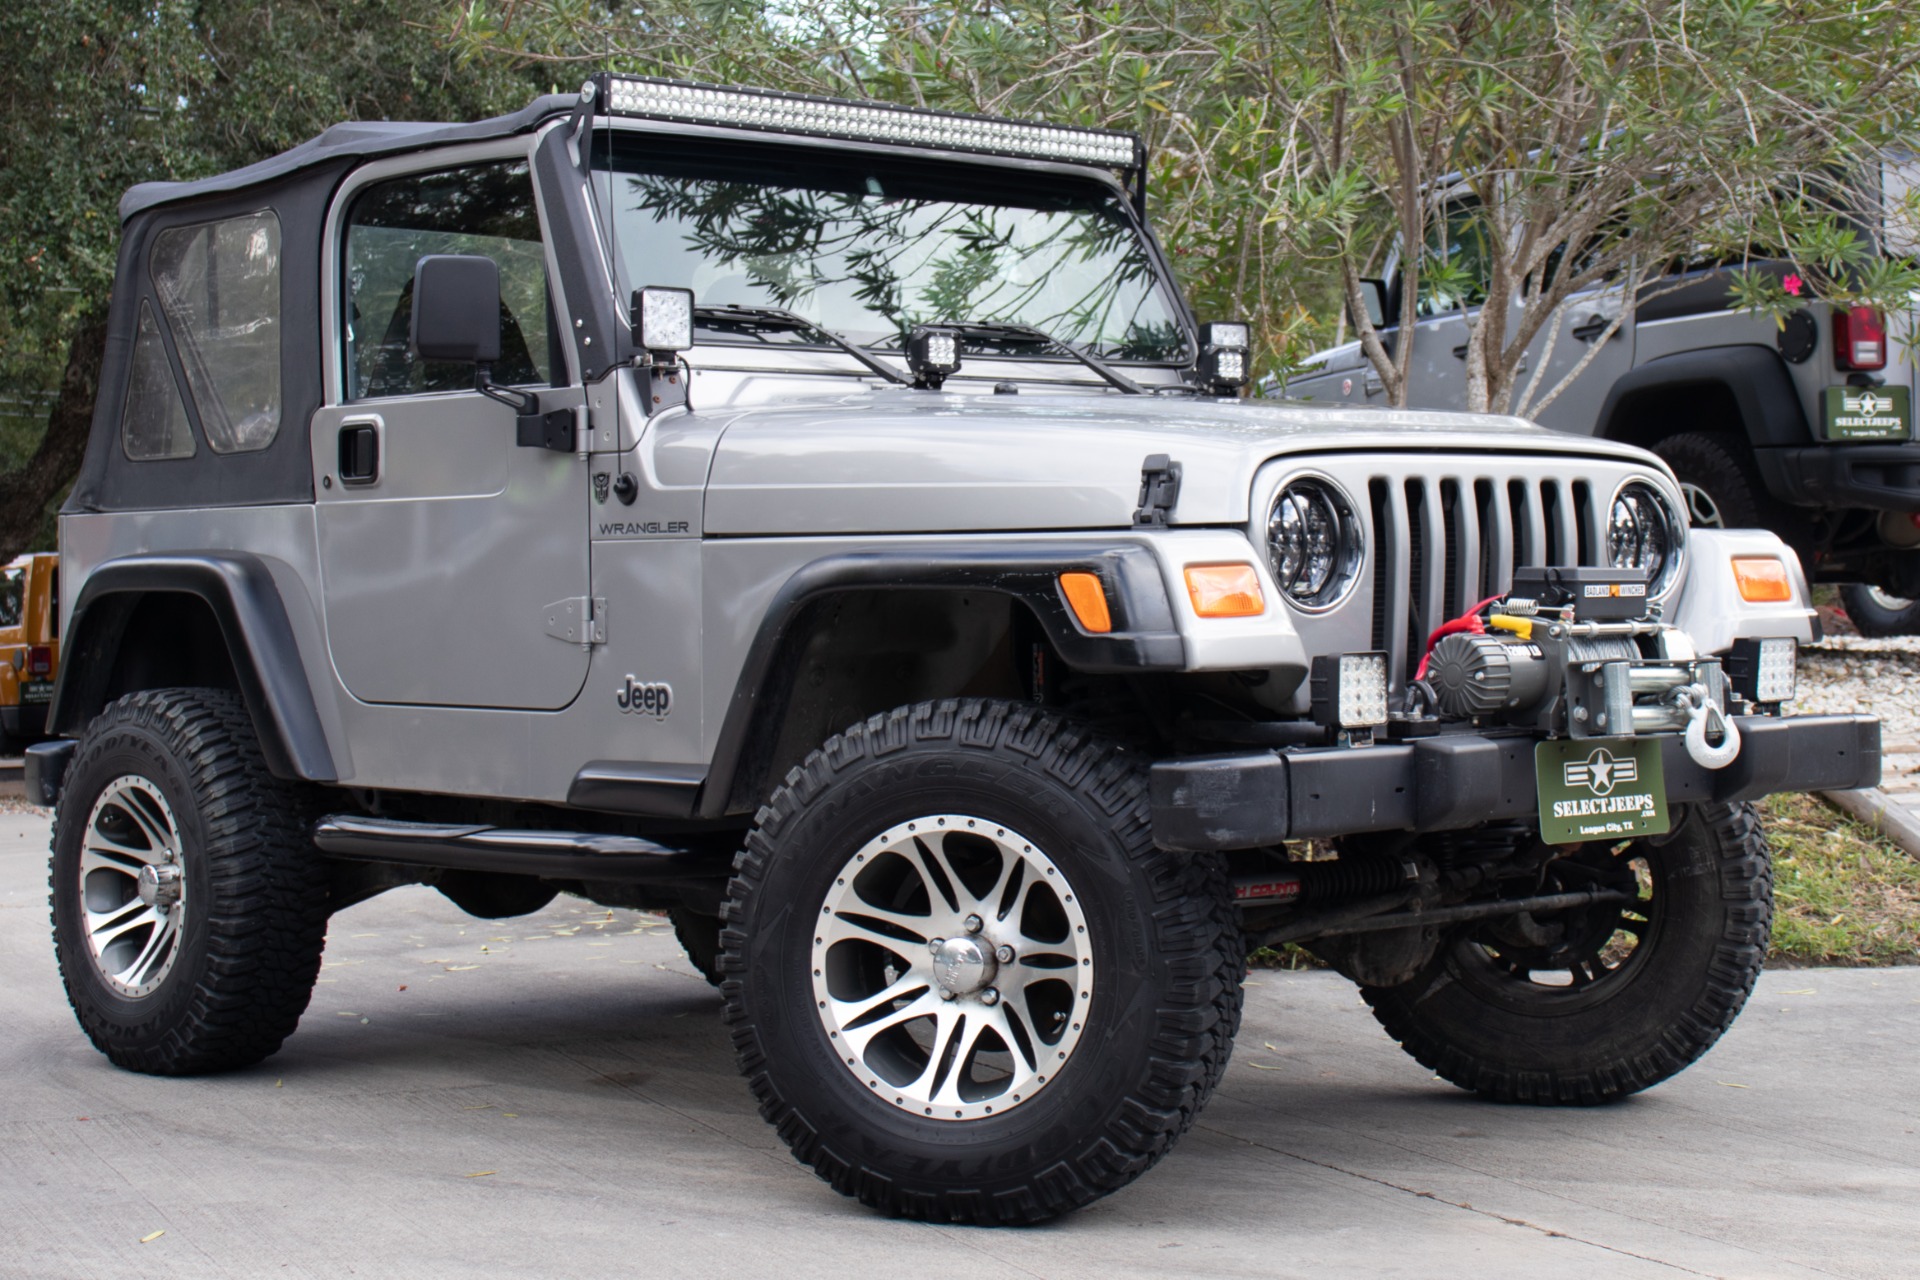 Used 2001 Jeep Wrangler SE For Sale ($12,995) | Select Jeeps Inc. Stock  #360980